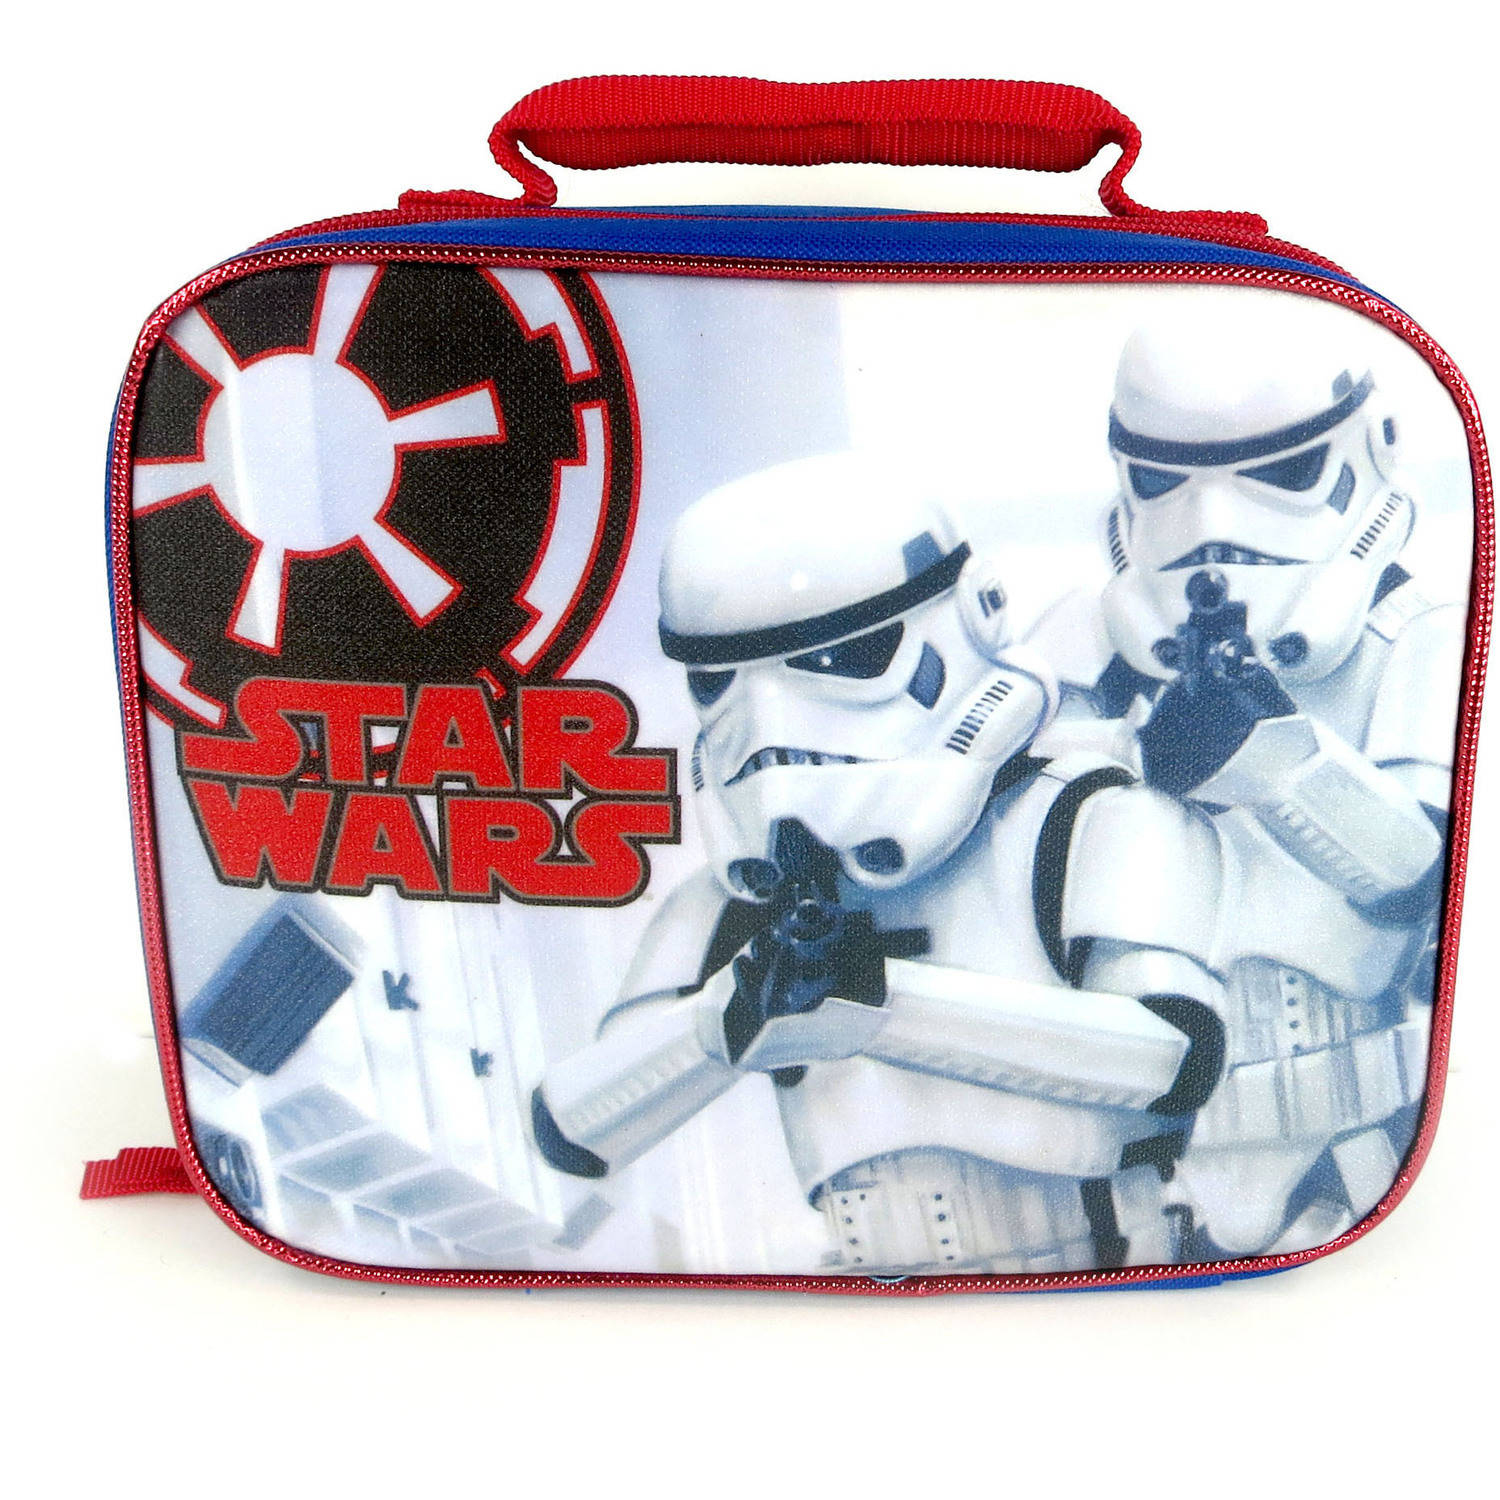 DISNEY STAR WARS SCHOOL 3 RING BINDER PENCIL POUCH STORM TROOPERS FREE USA SHIP